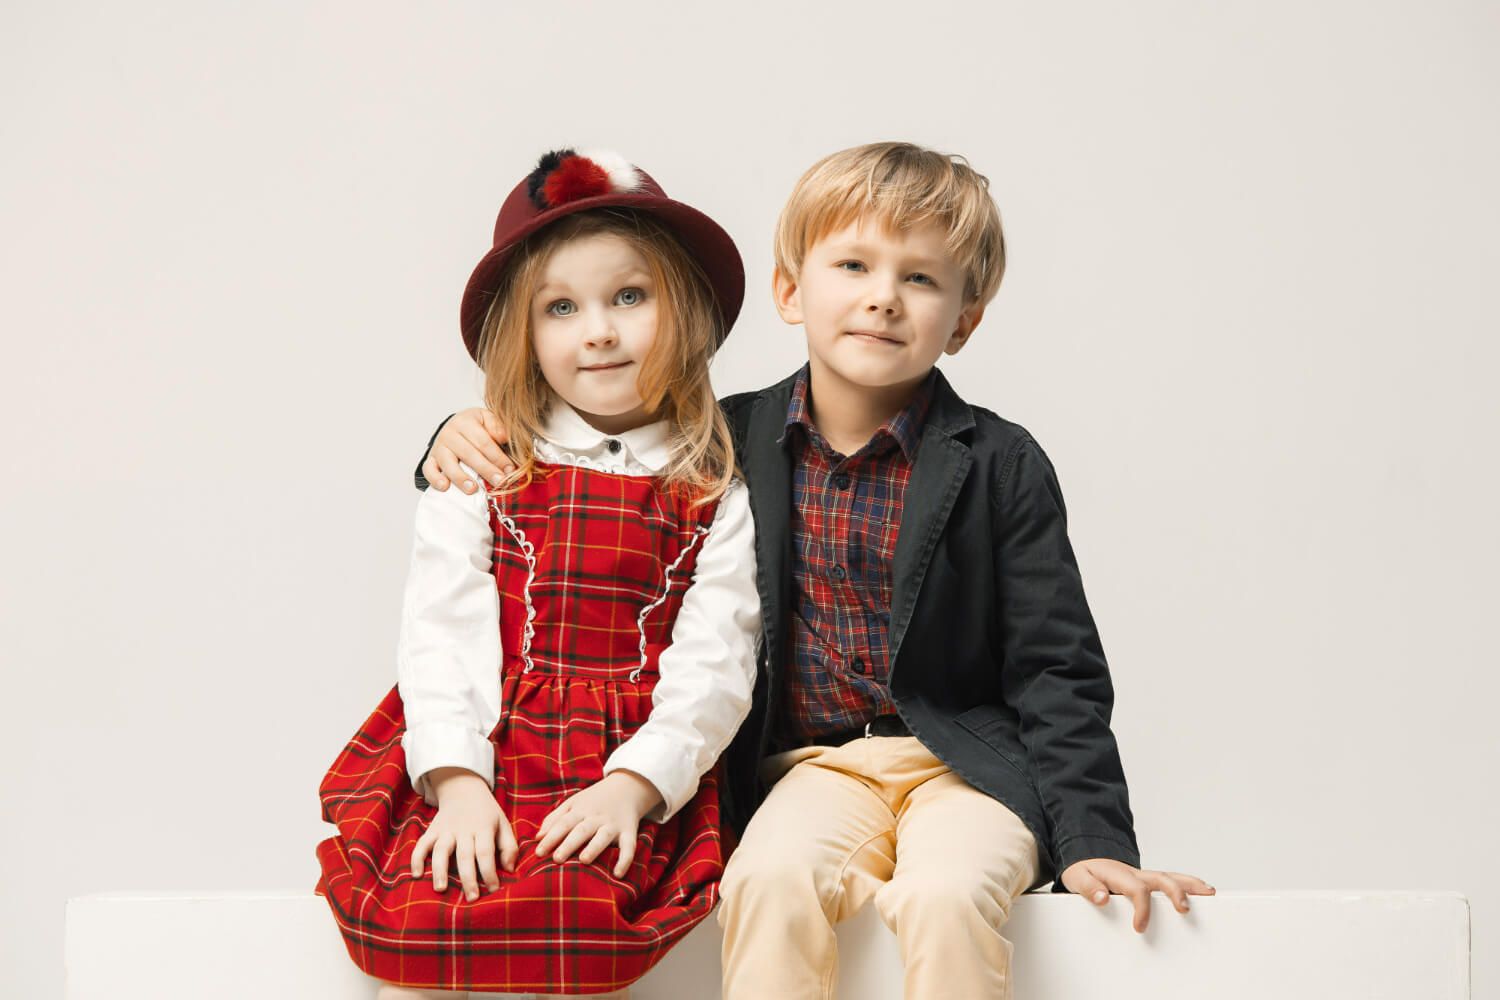 A young boy and girl wearing red plaid.